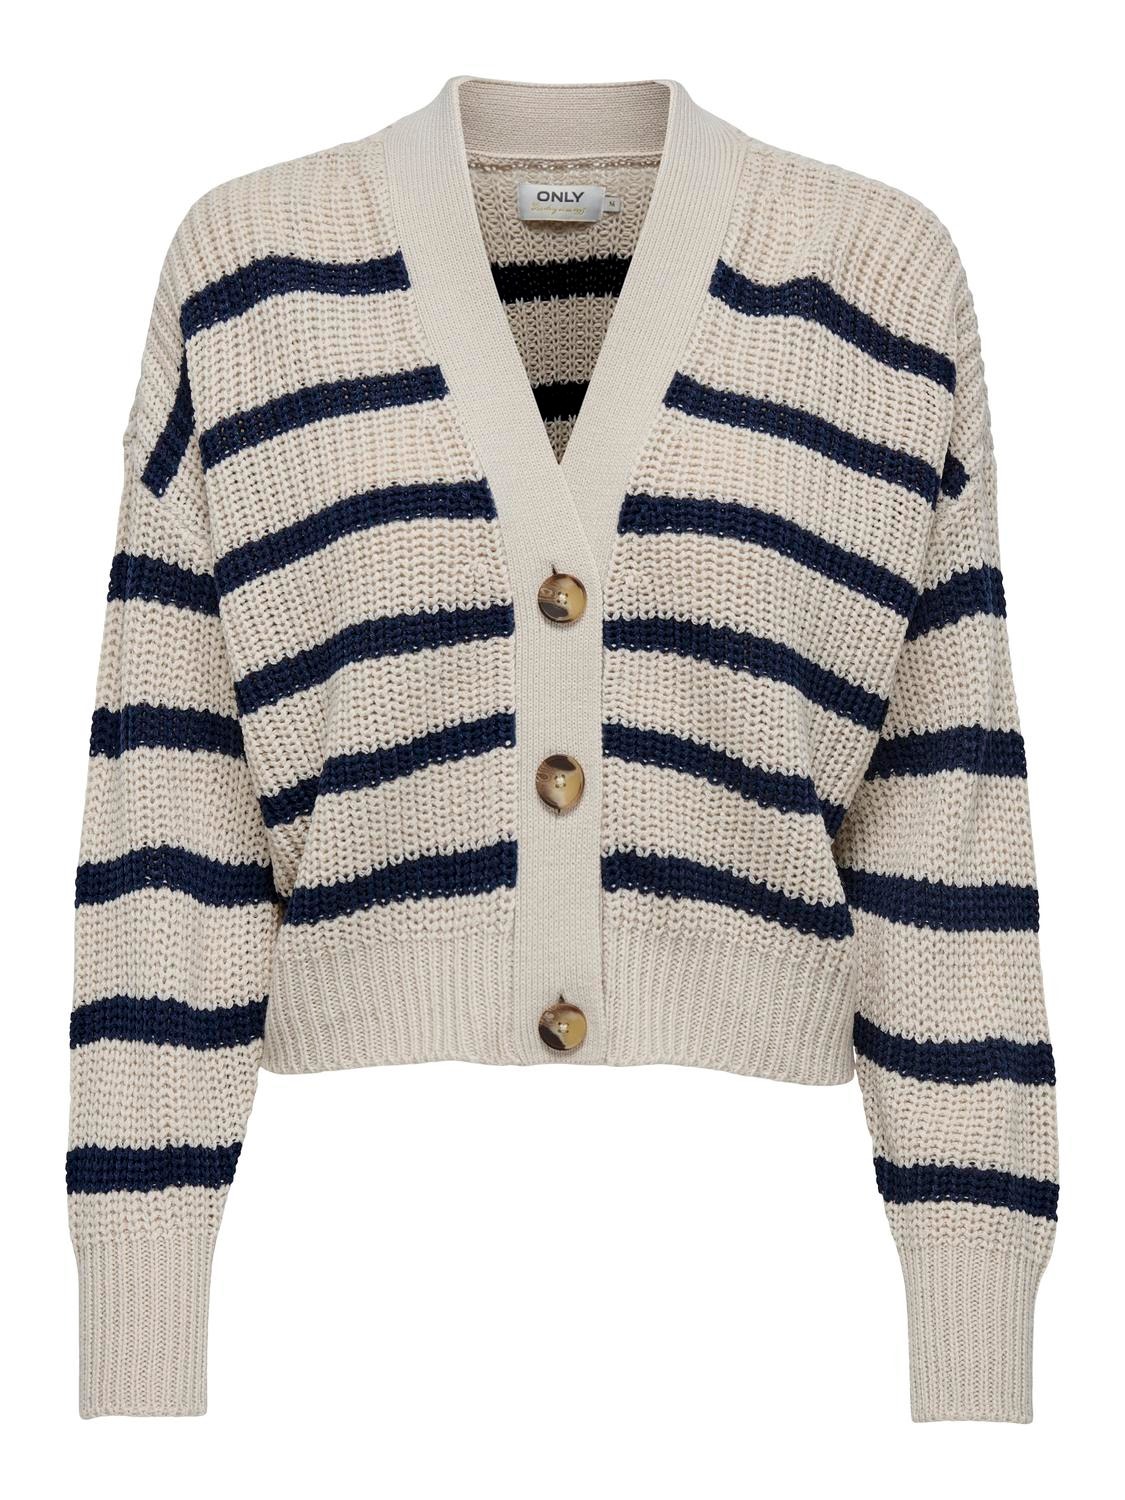 ONLY Regular Fit V-Neck Contrast sleeves Knit Cardigan -Pumice Stone - 15261057